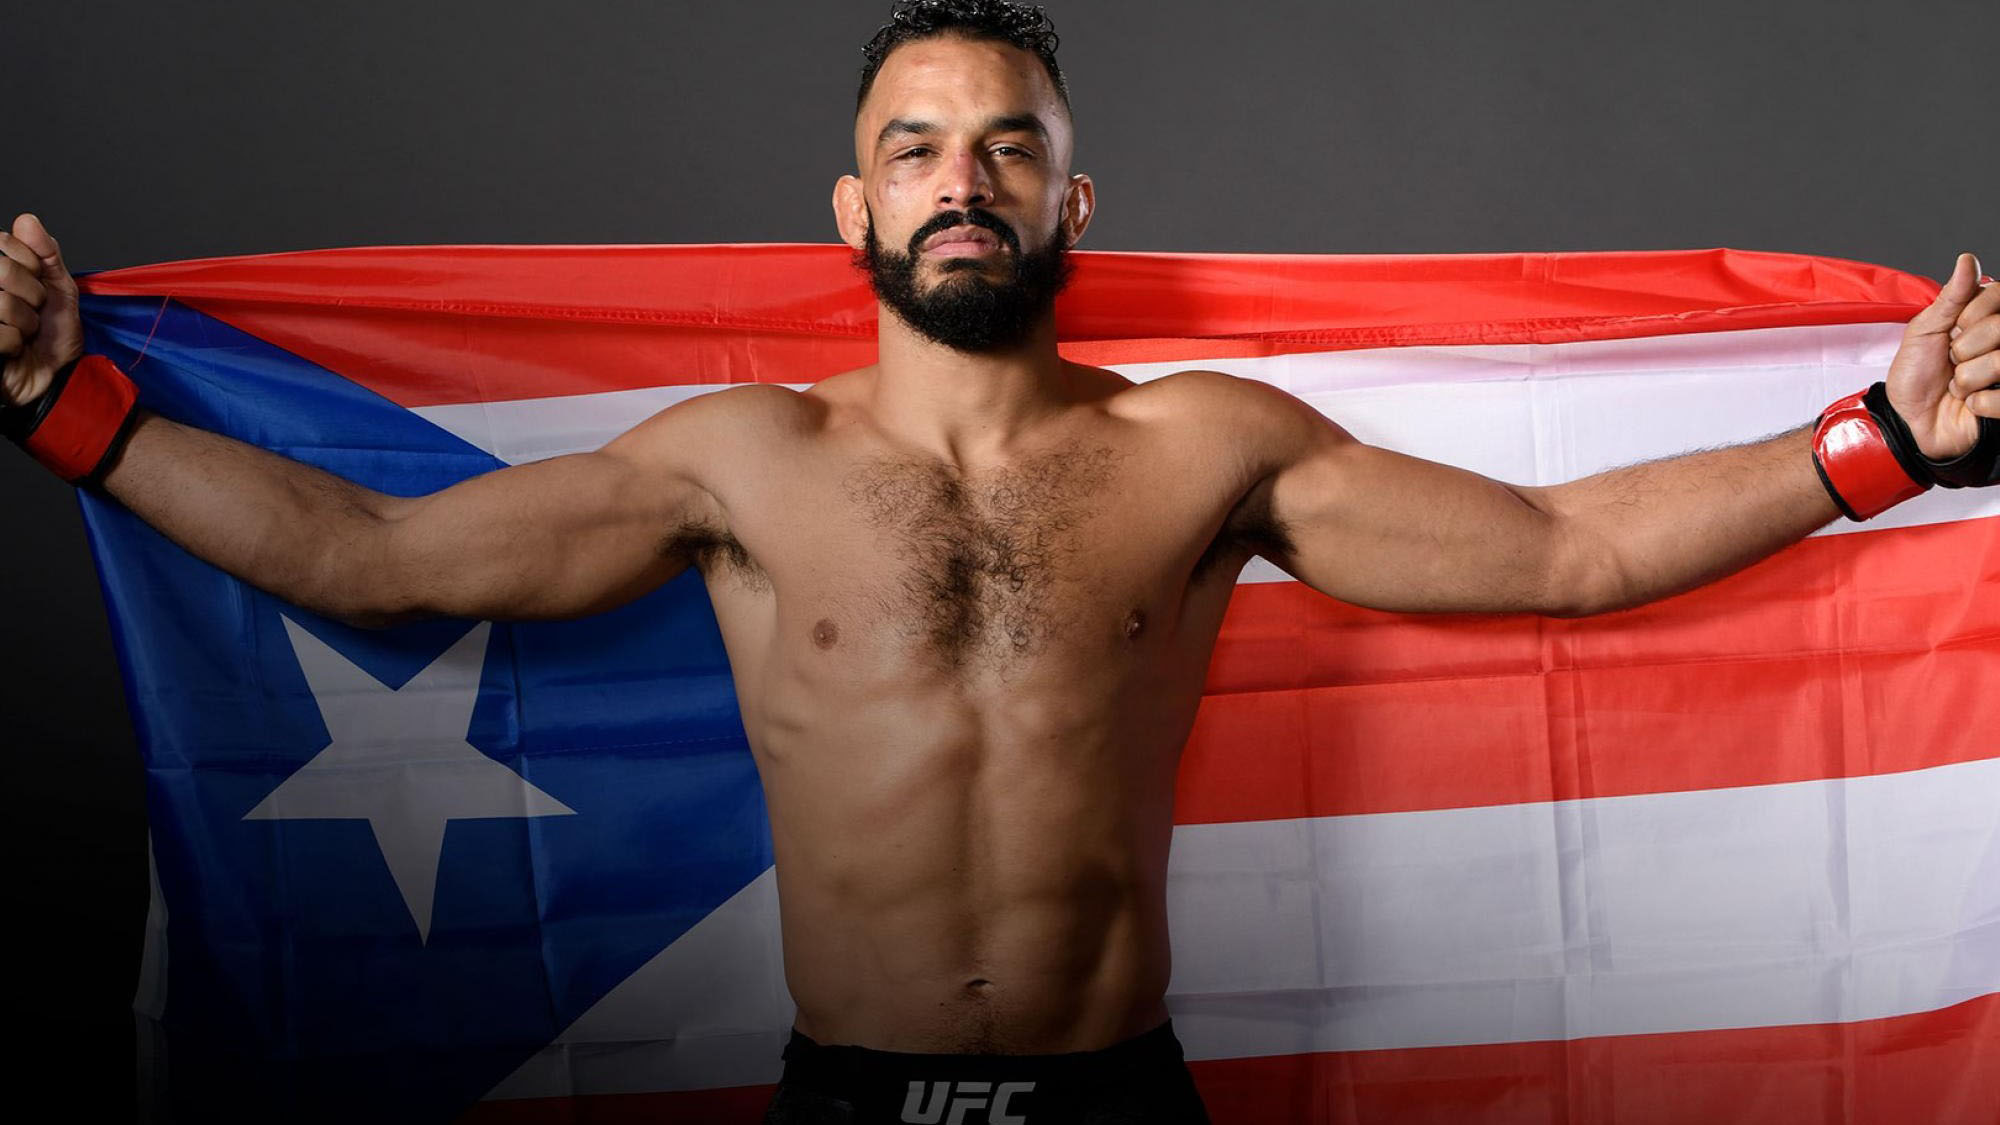 Roberto Font (born June 25, 1987) is an American professional mixed martial artist. Font currently competes in the Bantamweight division for the Ultim...